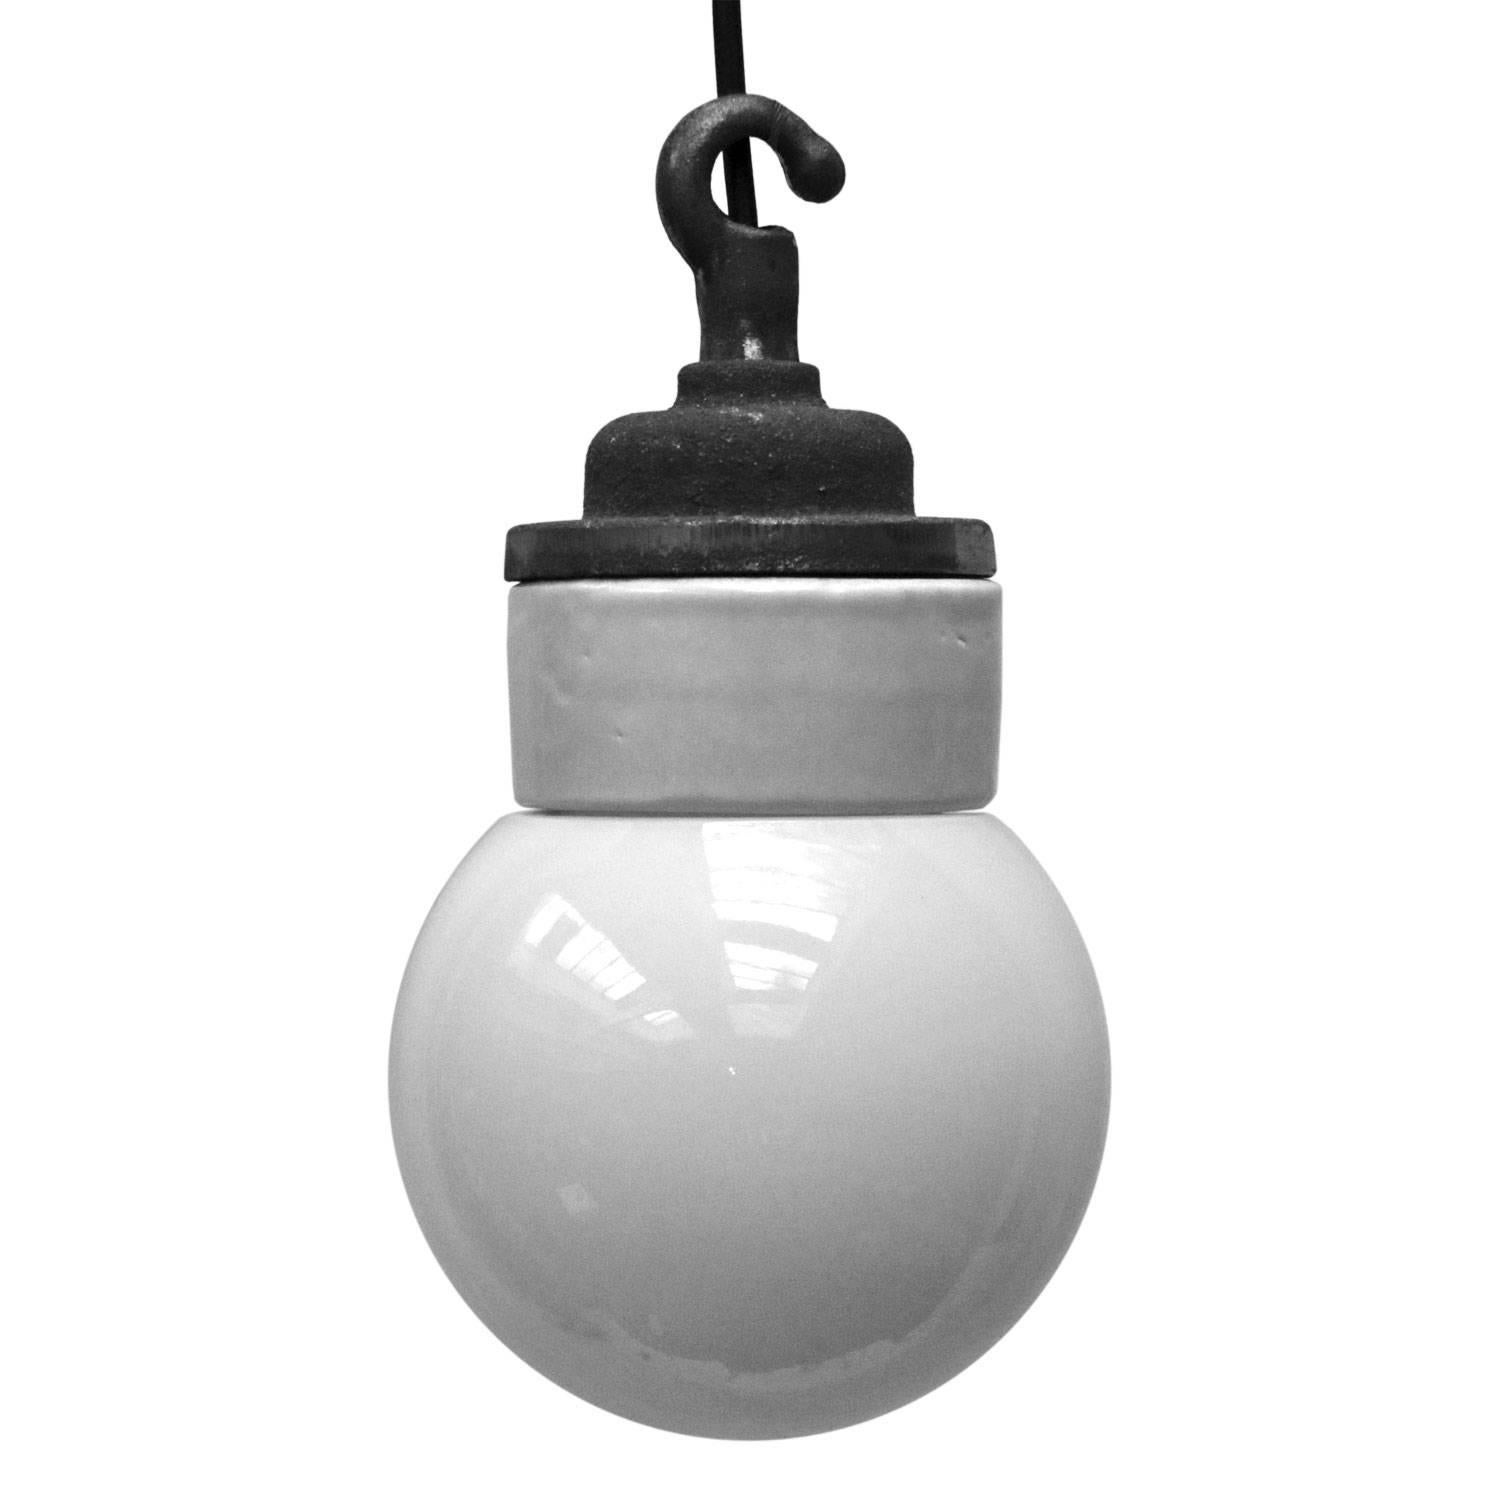 Porcelain industrial hanging lamp. White porcelain. Cast iron and white frosted glass.
Two conductors. No ground.

Weight: 1.7 kg / 3.7 lb

All lamps have been made suitable by international standards for incandescent light bulbs, energy-efficient